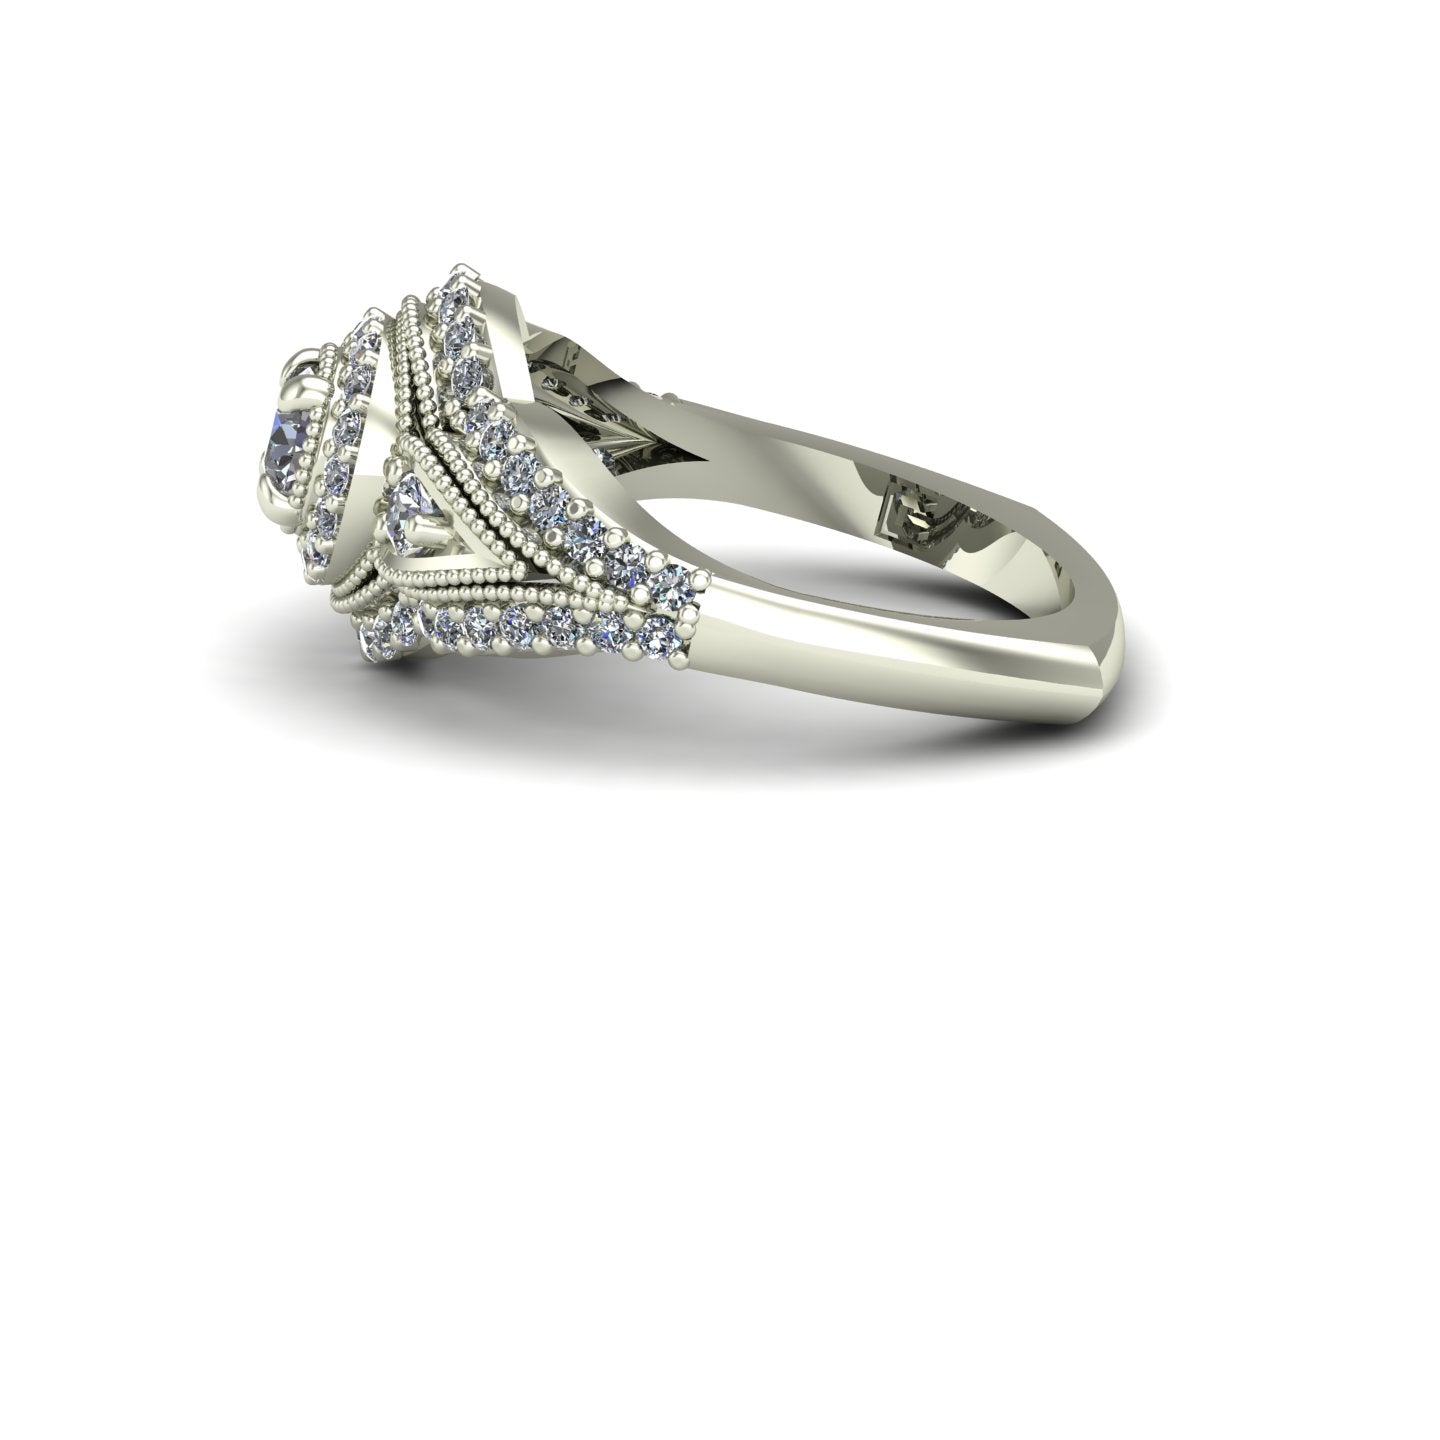 Diamond halo engagement ring with diamond border in 14k white gold - Charles Babb Designs - side view